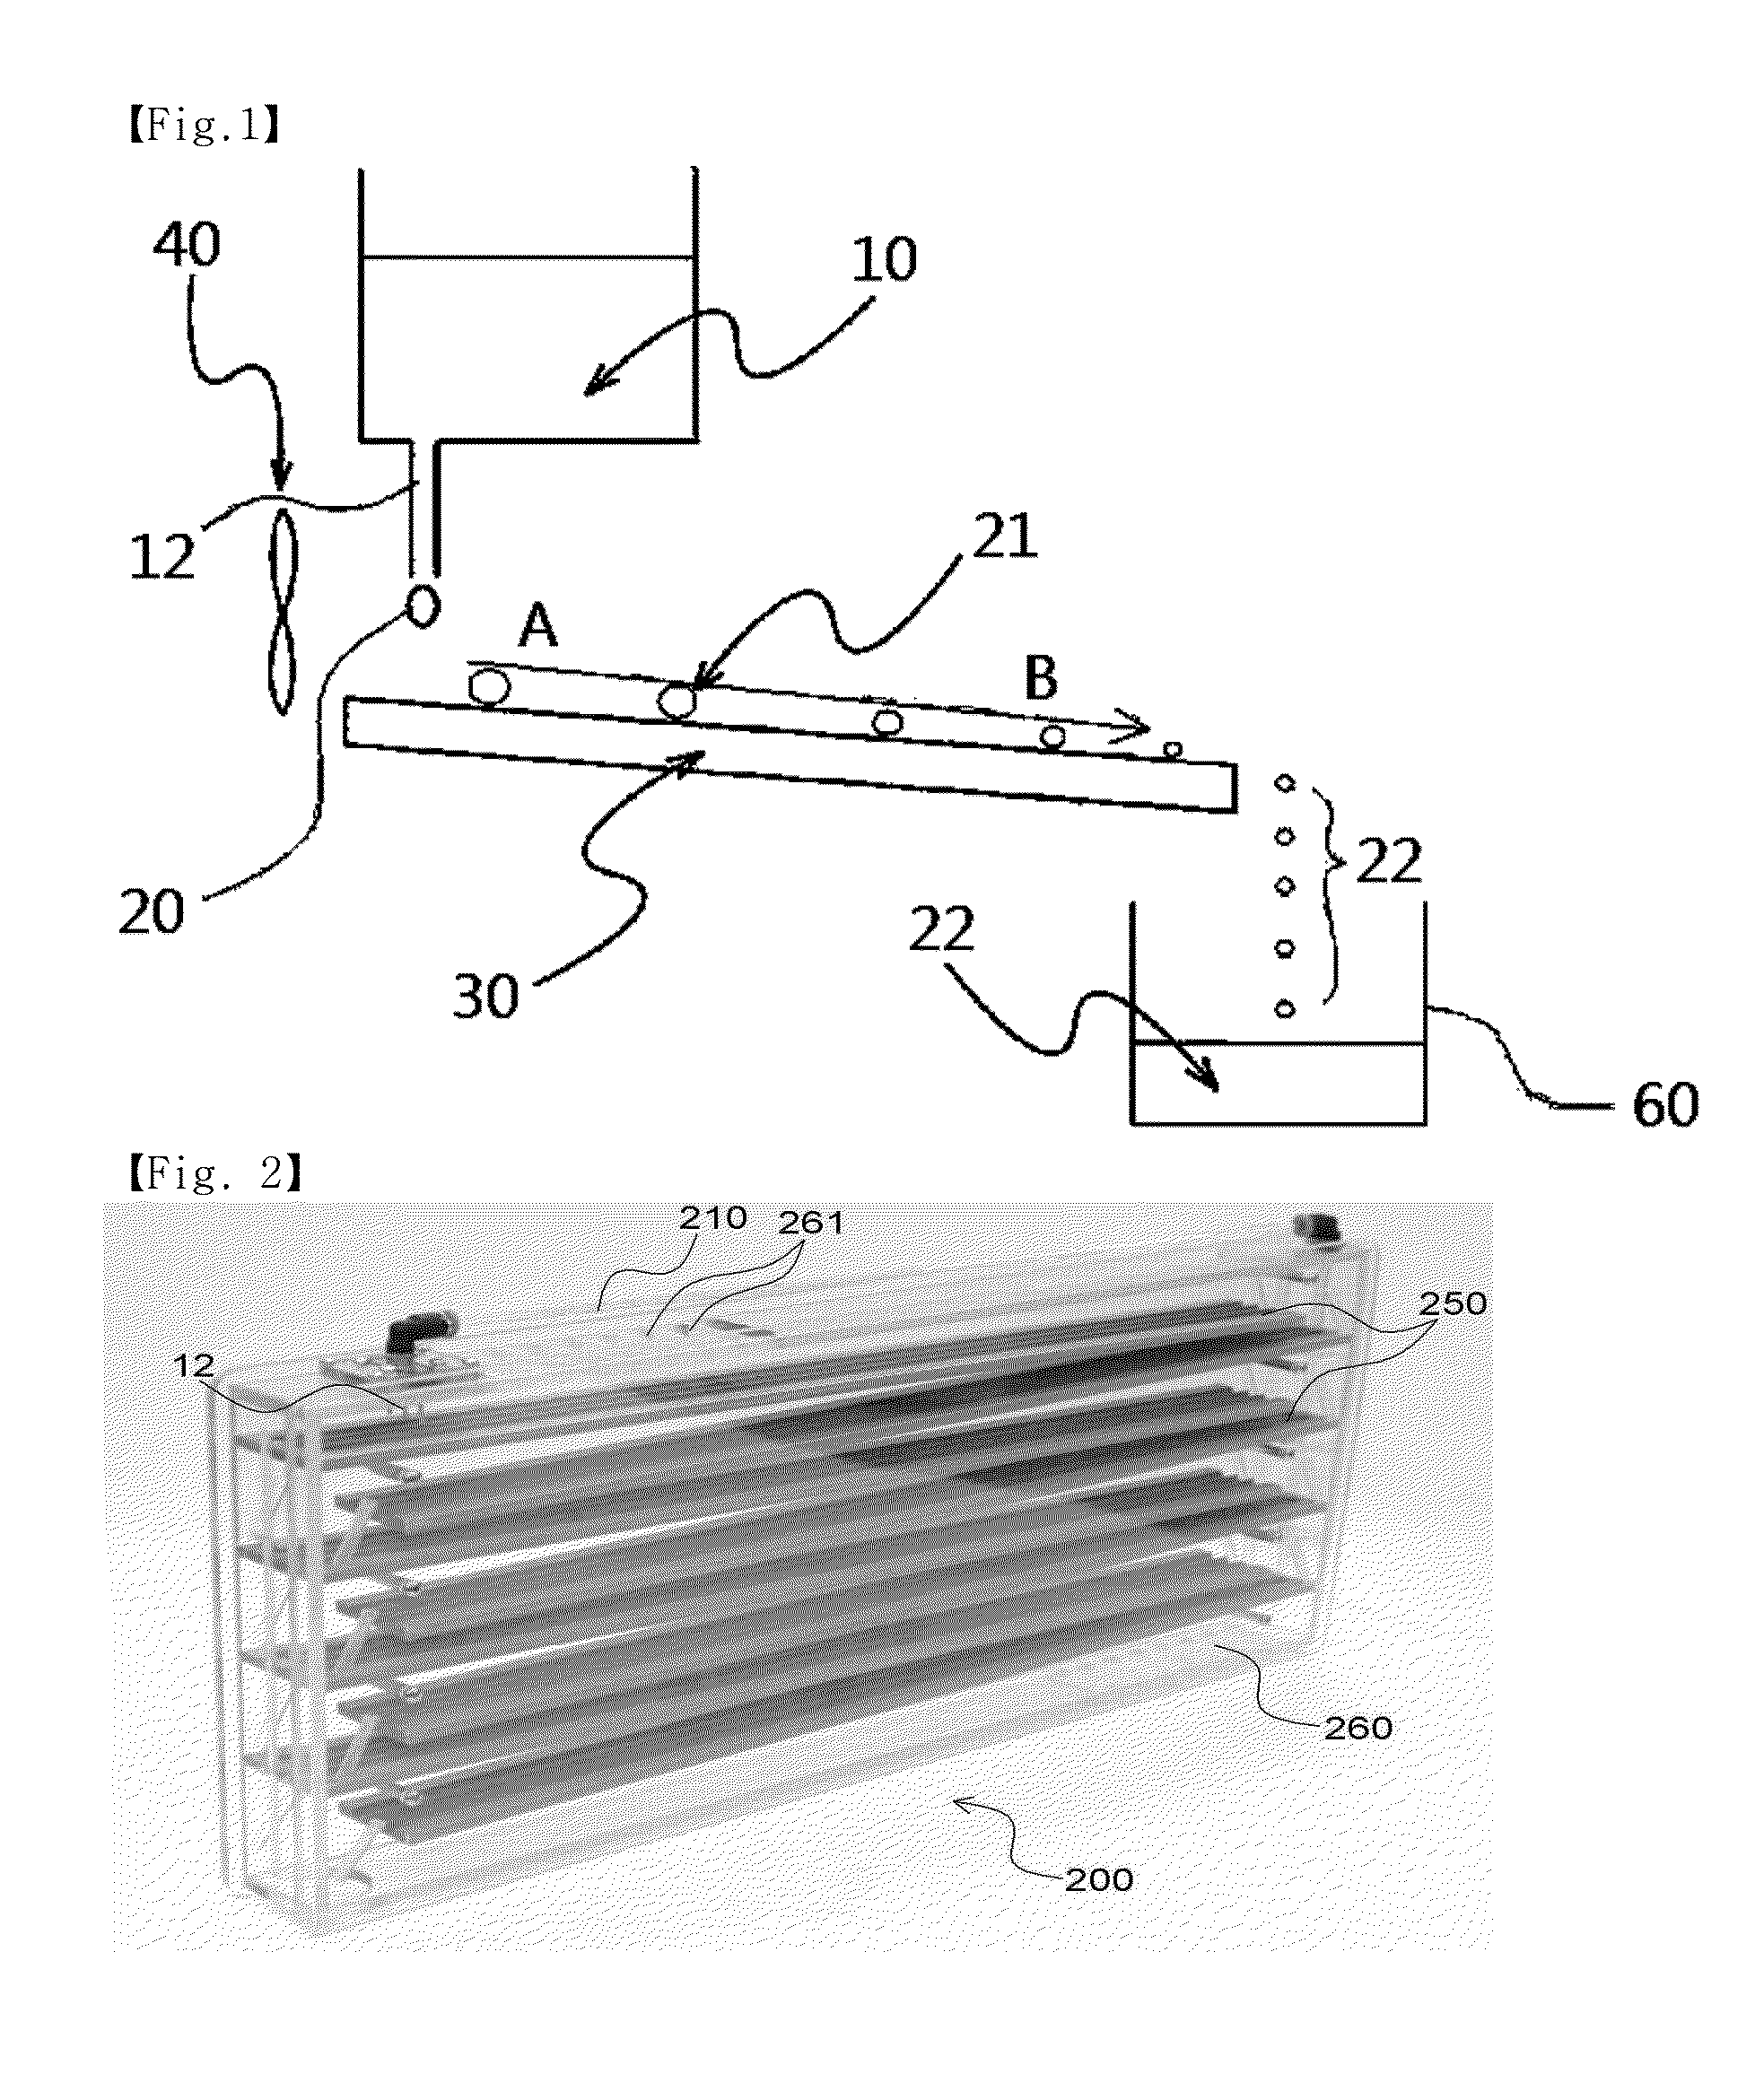 Droplet evaporation based self-cleaning humidification device